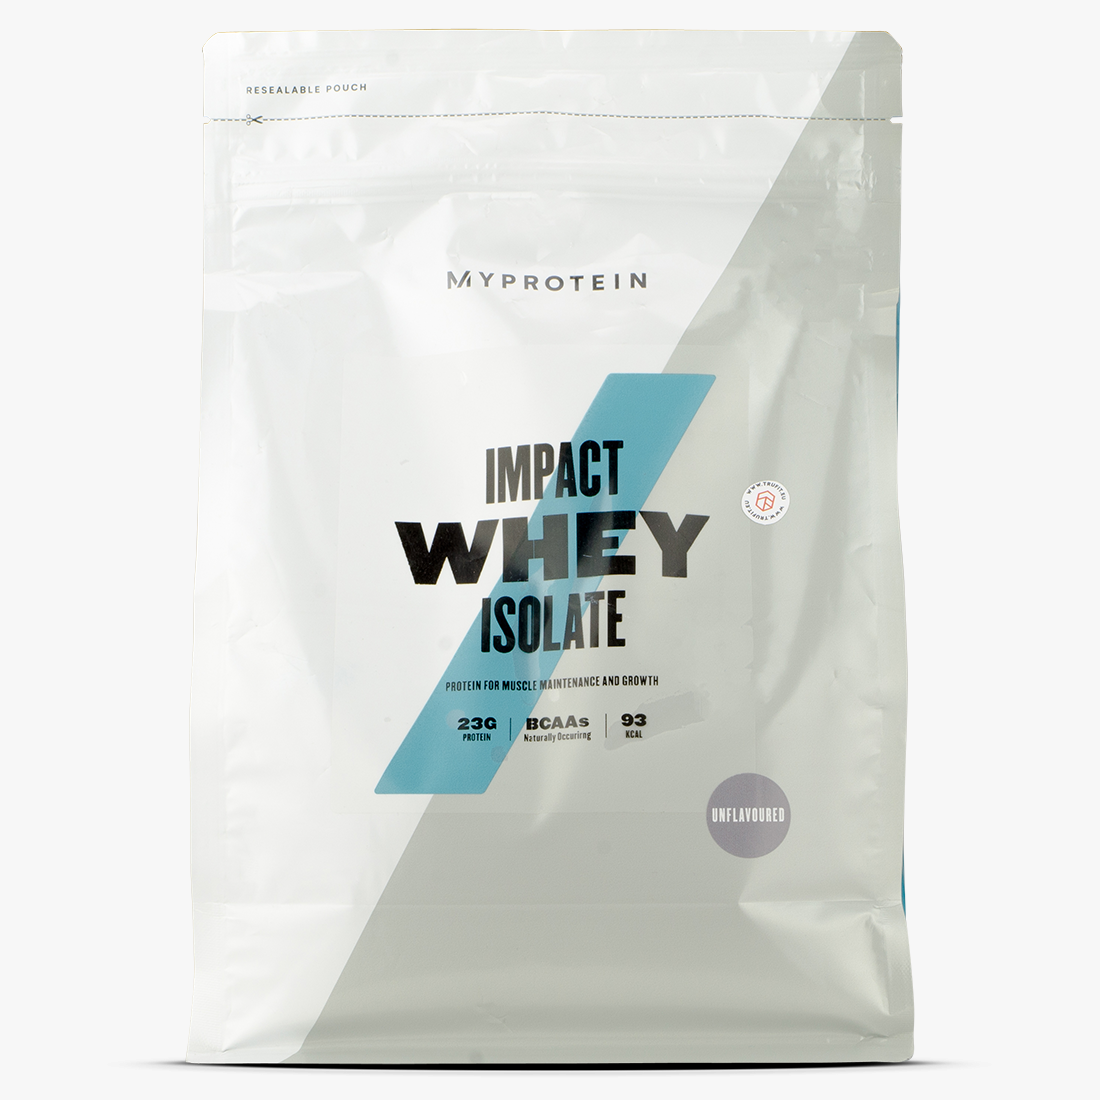 MyProtein - Whey Isolate impactful results - TRU·FIT